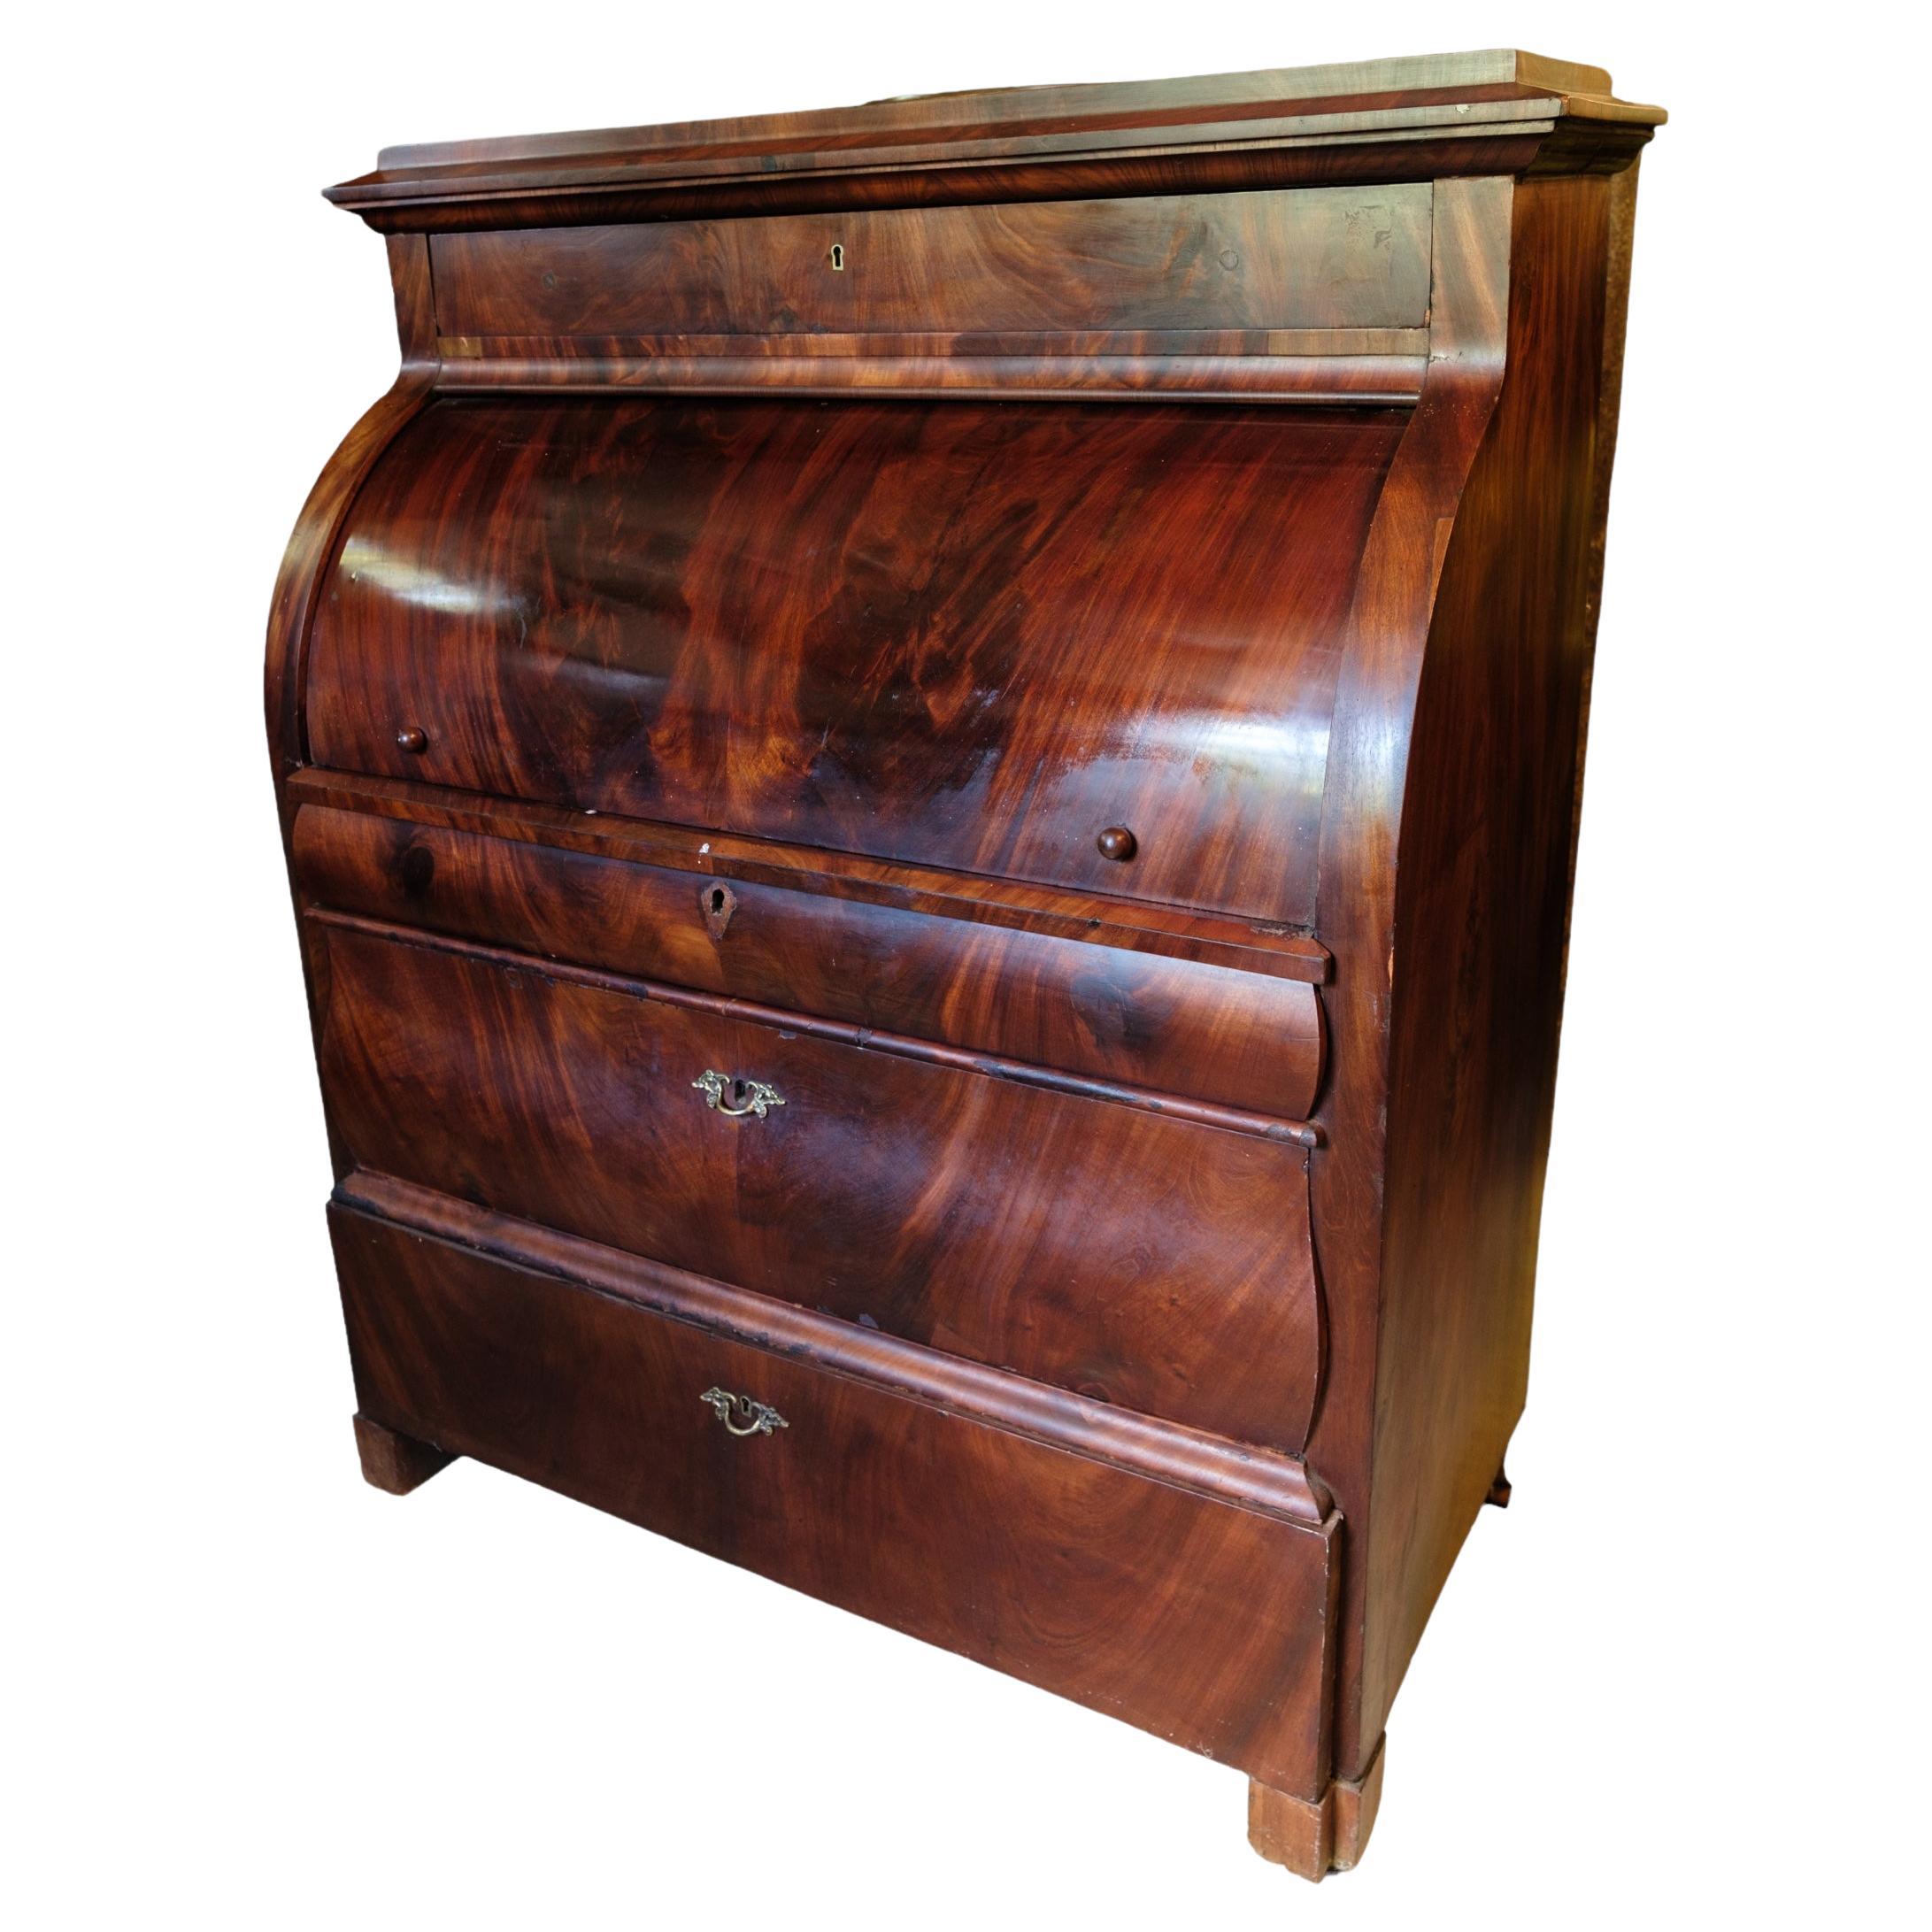 Mahogany chatol with four drawers and internal marquetry from around the year 1820.
Dimensions in cm: H:140 W:110 D:56